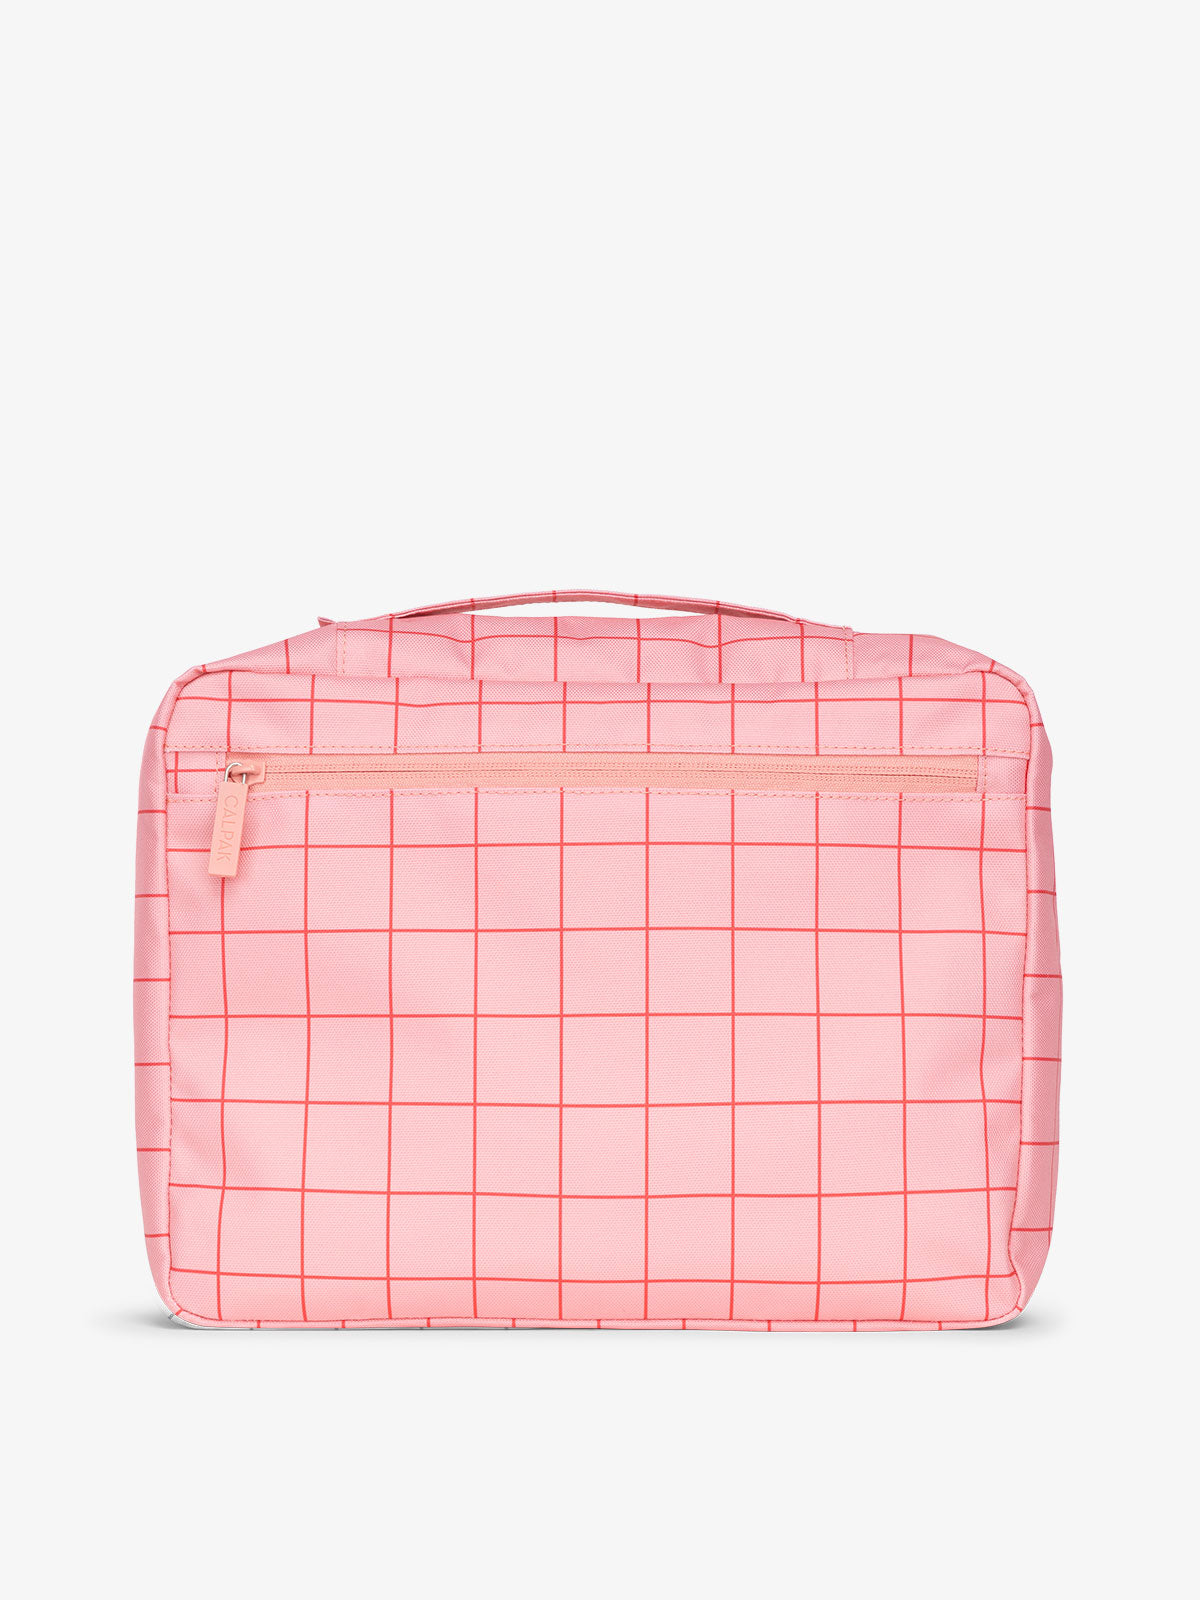 CALPAK zippered mesh organizers with top handle in pink grid pattern